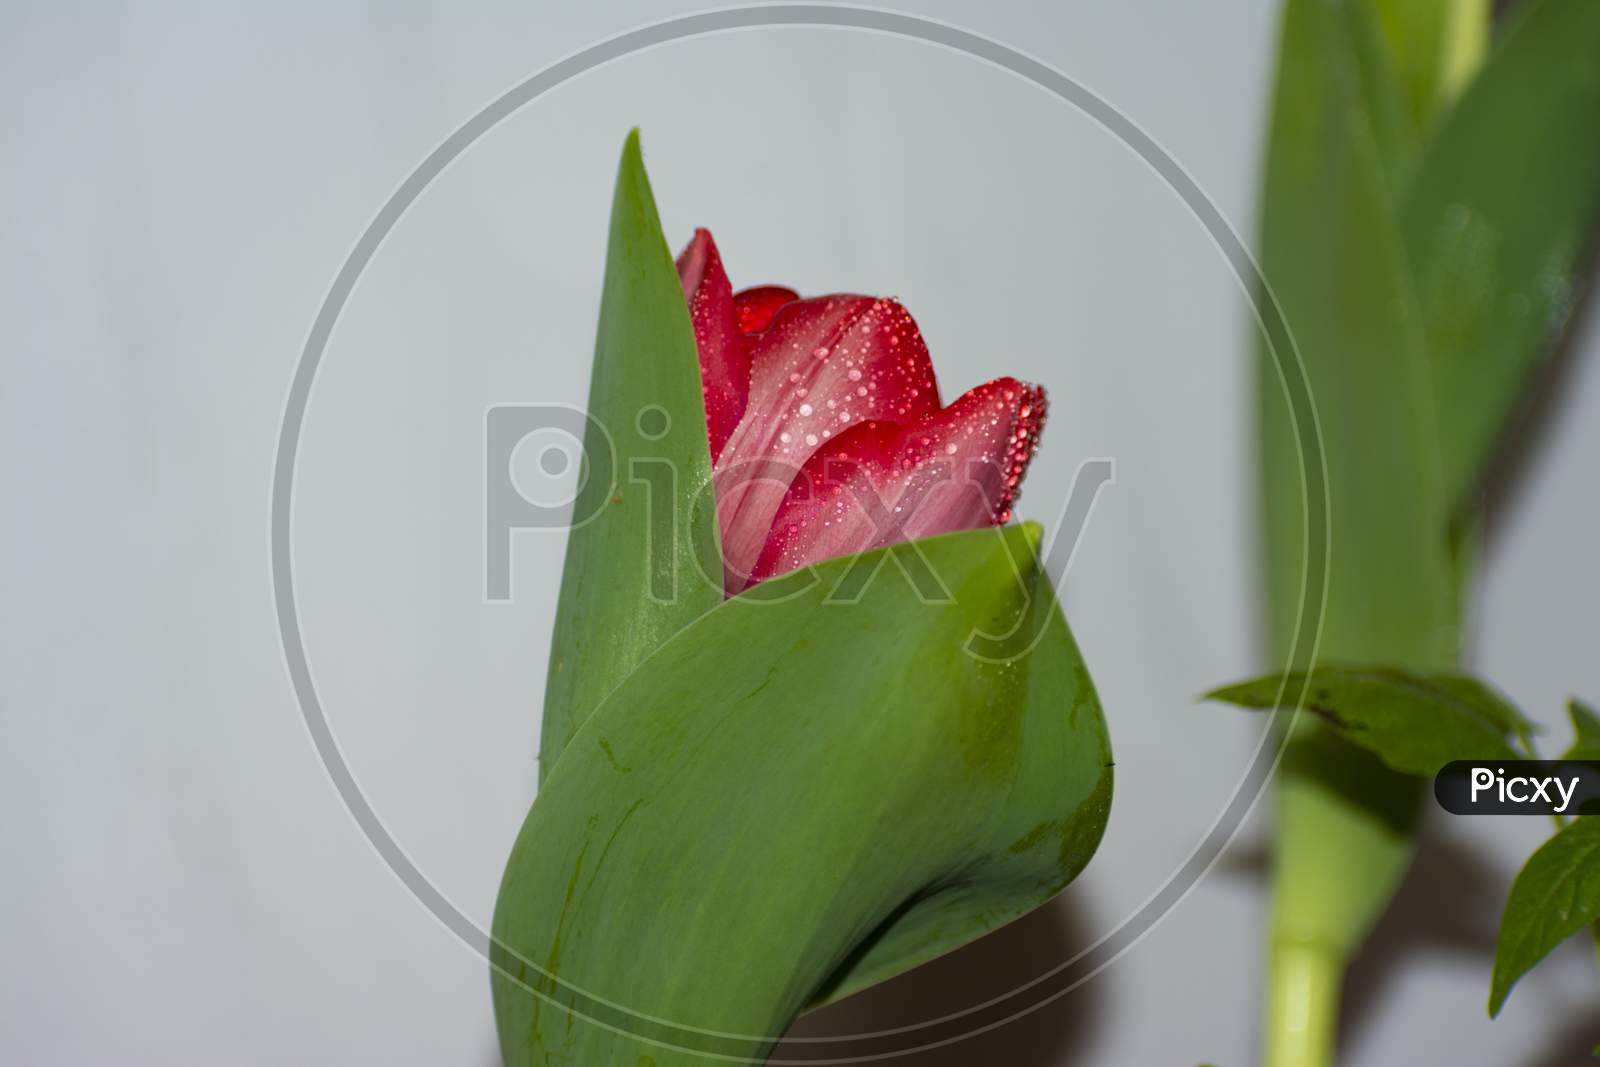 A close up red tulip flower with droplets of waterand green extended leaves